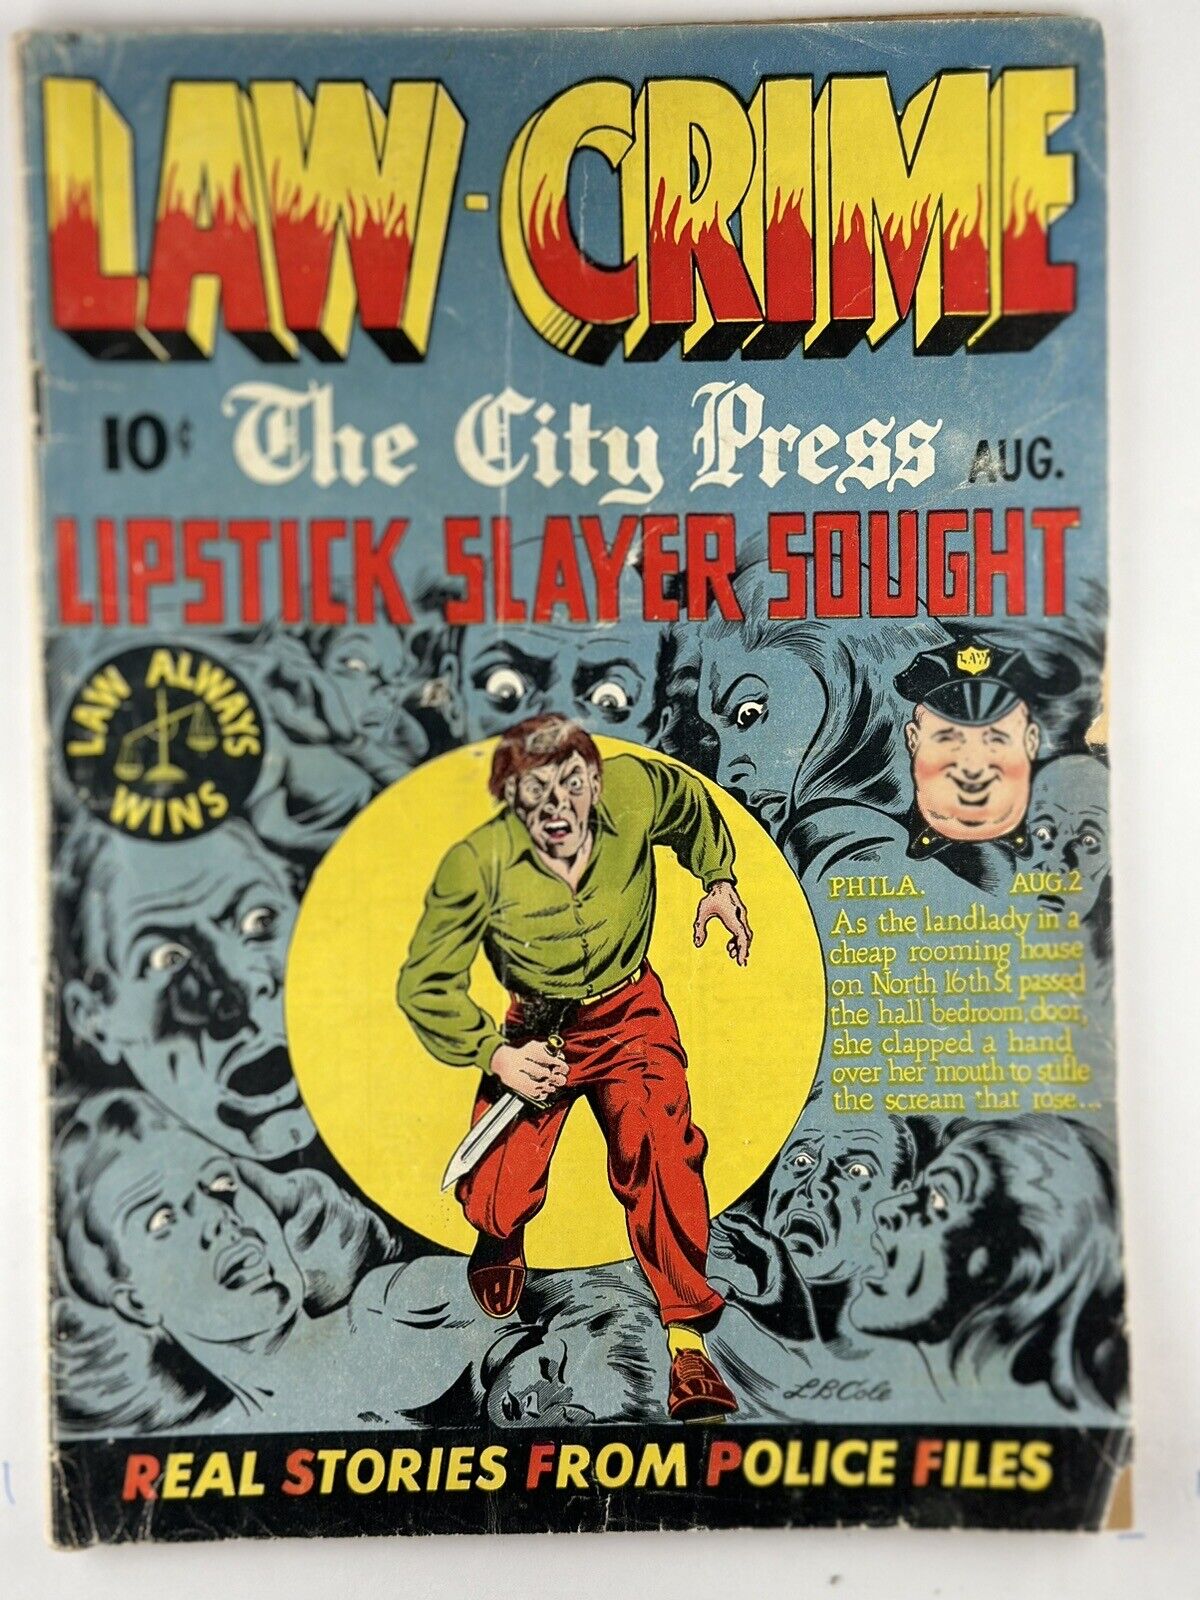 LAW AGAINST CRIME # 3 ESSENKAY COMICS August 1948 LB COLE COVER ART USED in SOTI